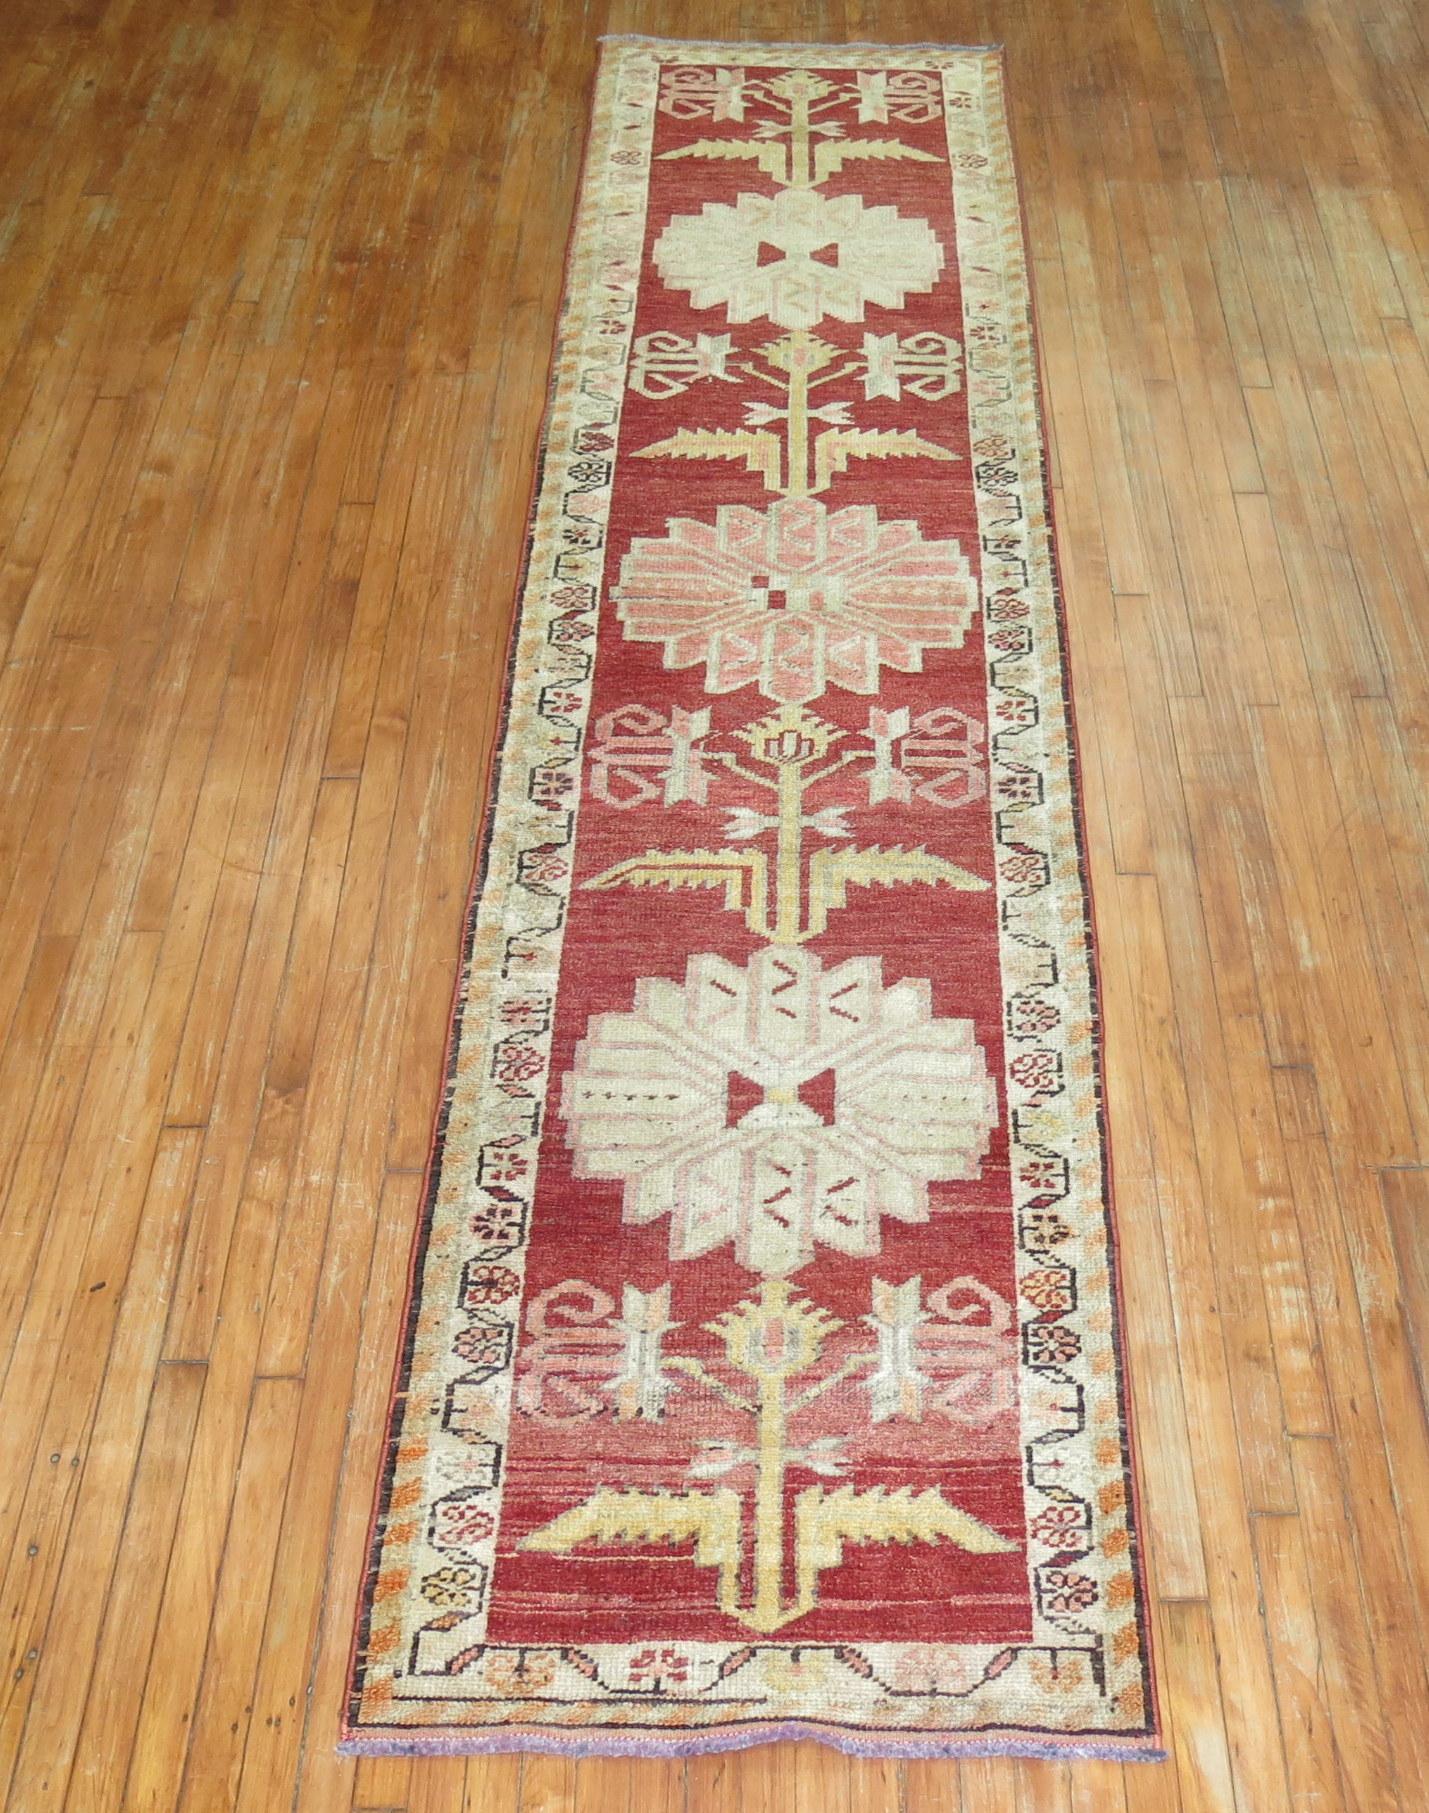 A Turkish anatolian runner from the middle of the 20th century. 

Measures: 2'10” x 12'4”.